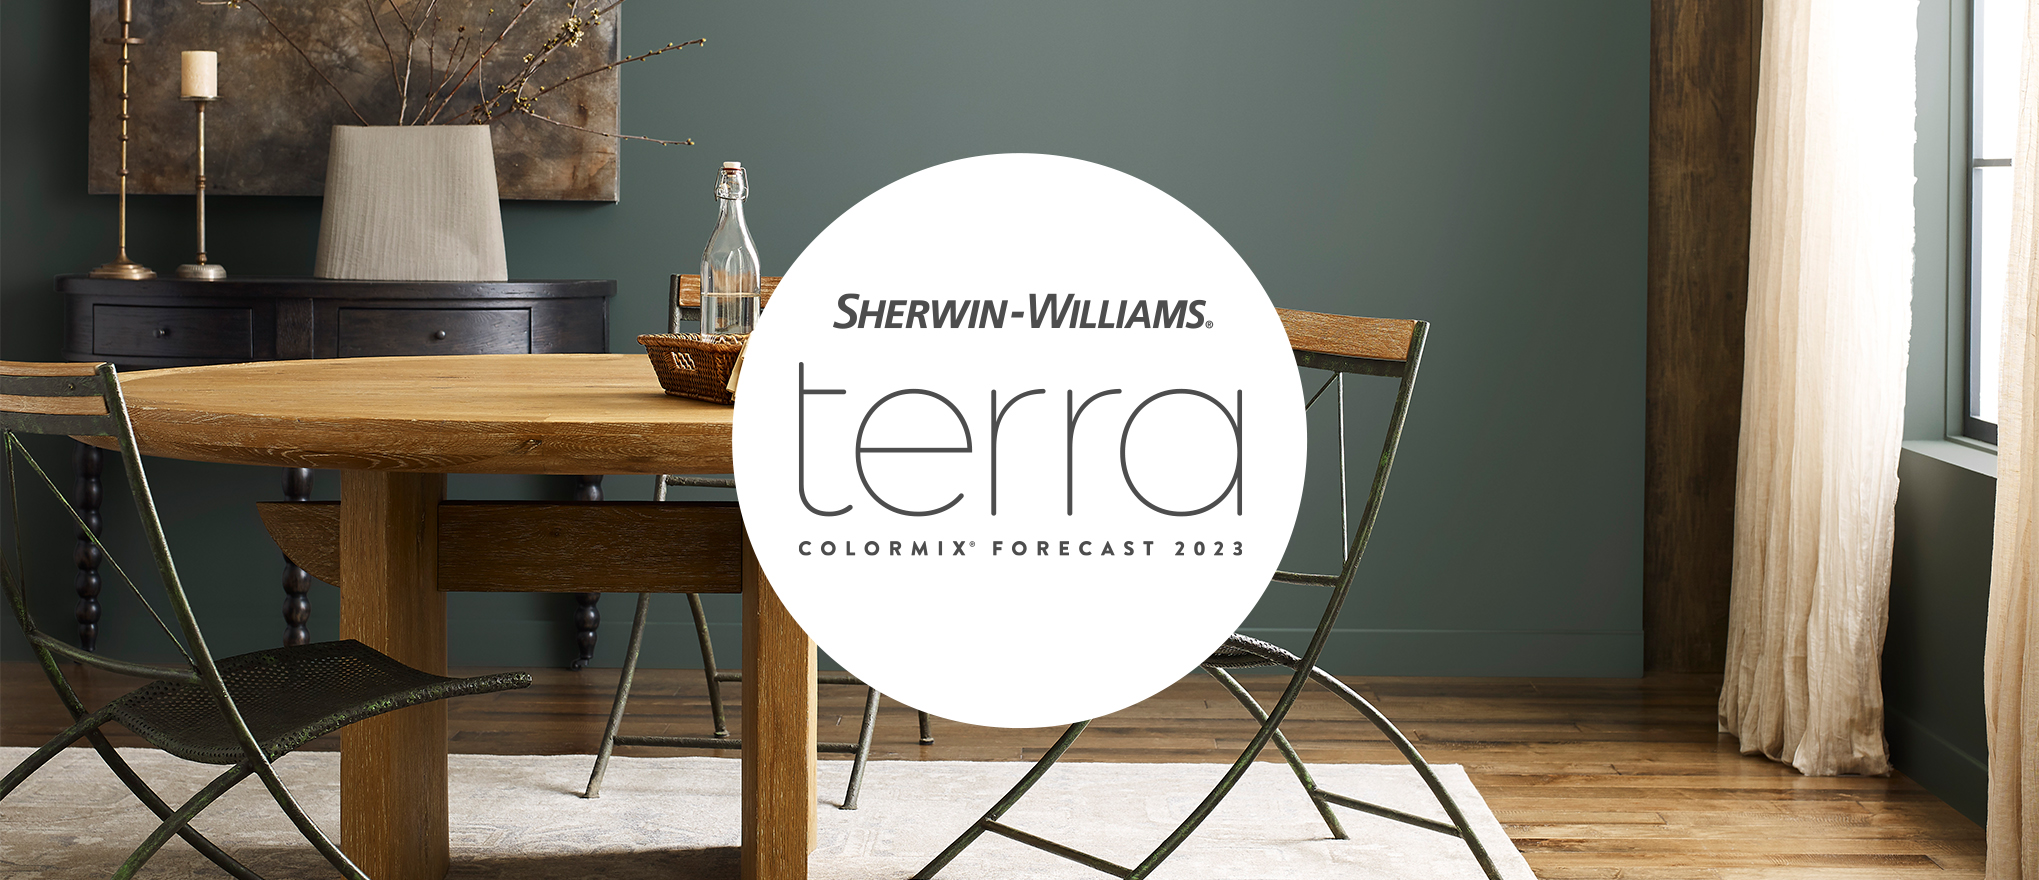 Sherwin Williams Colormix Forecast for 2023 in Your New Home